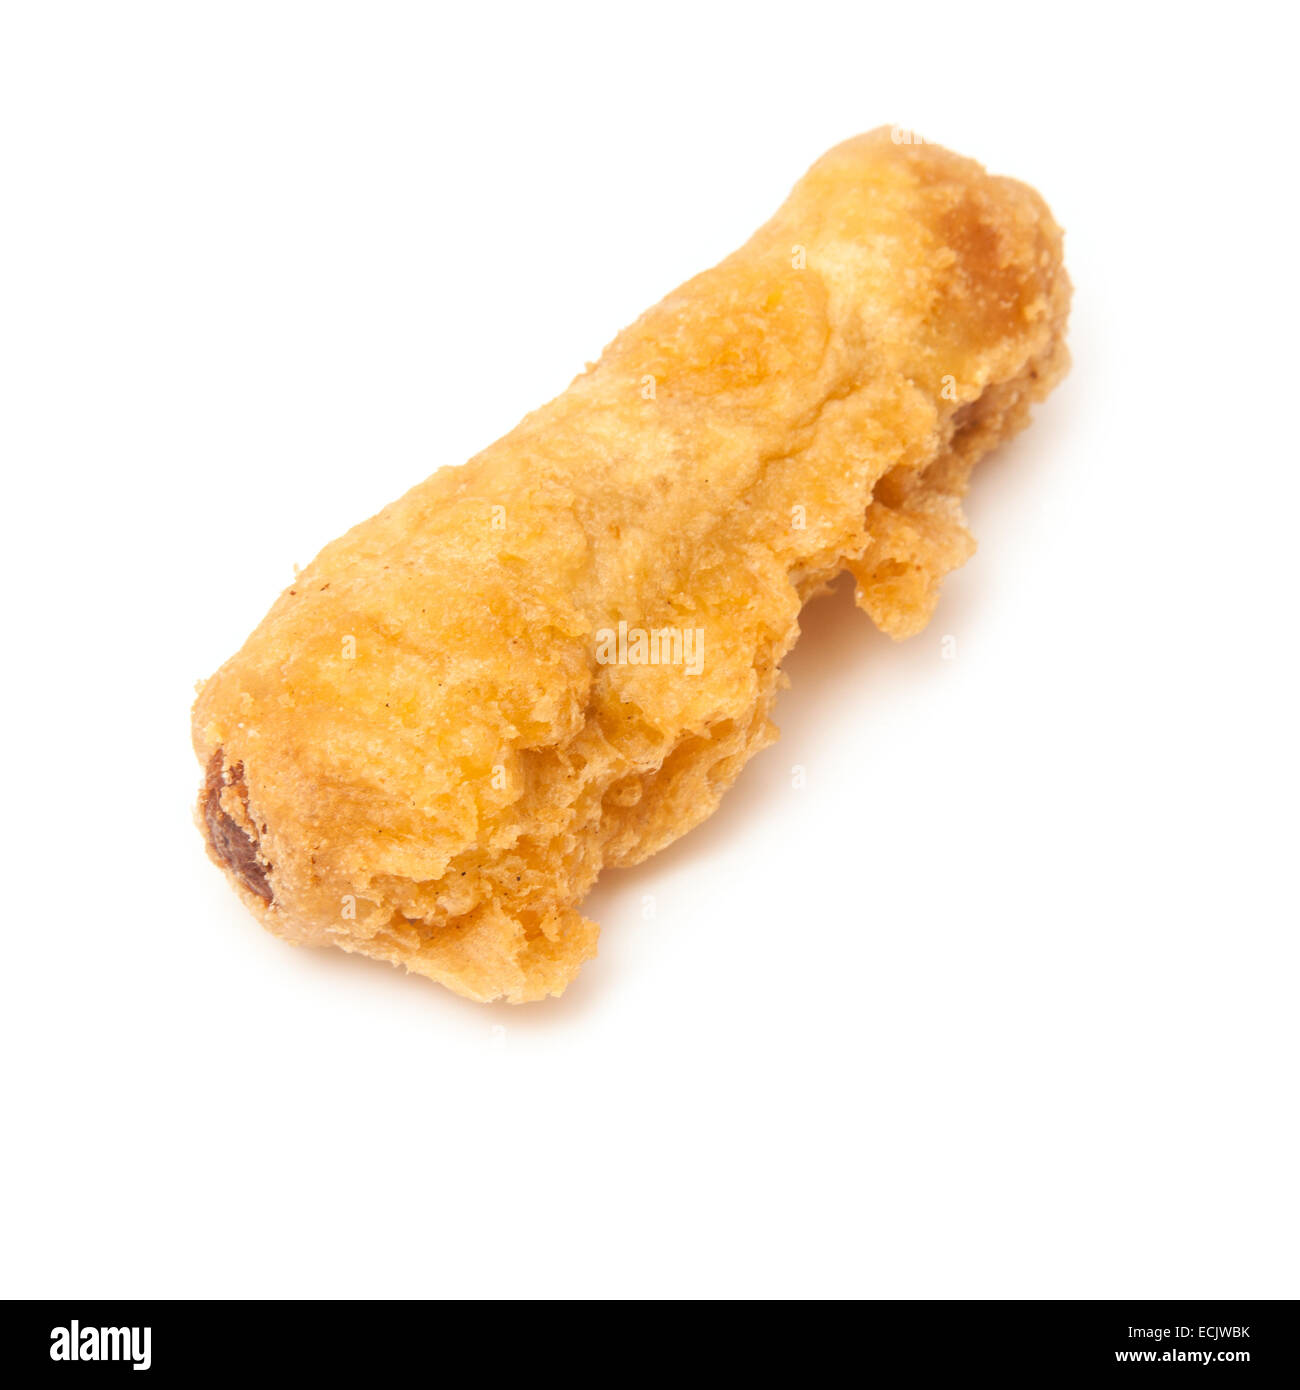 Deep fried sausage fresh from the fish and chip shop. Stock Photo